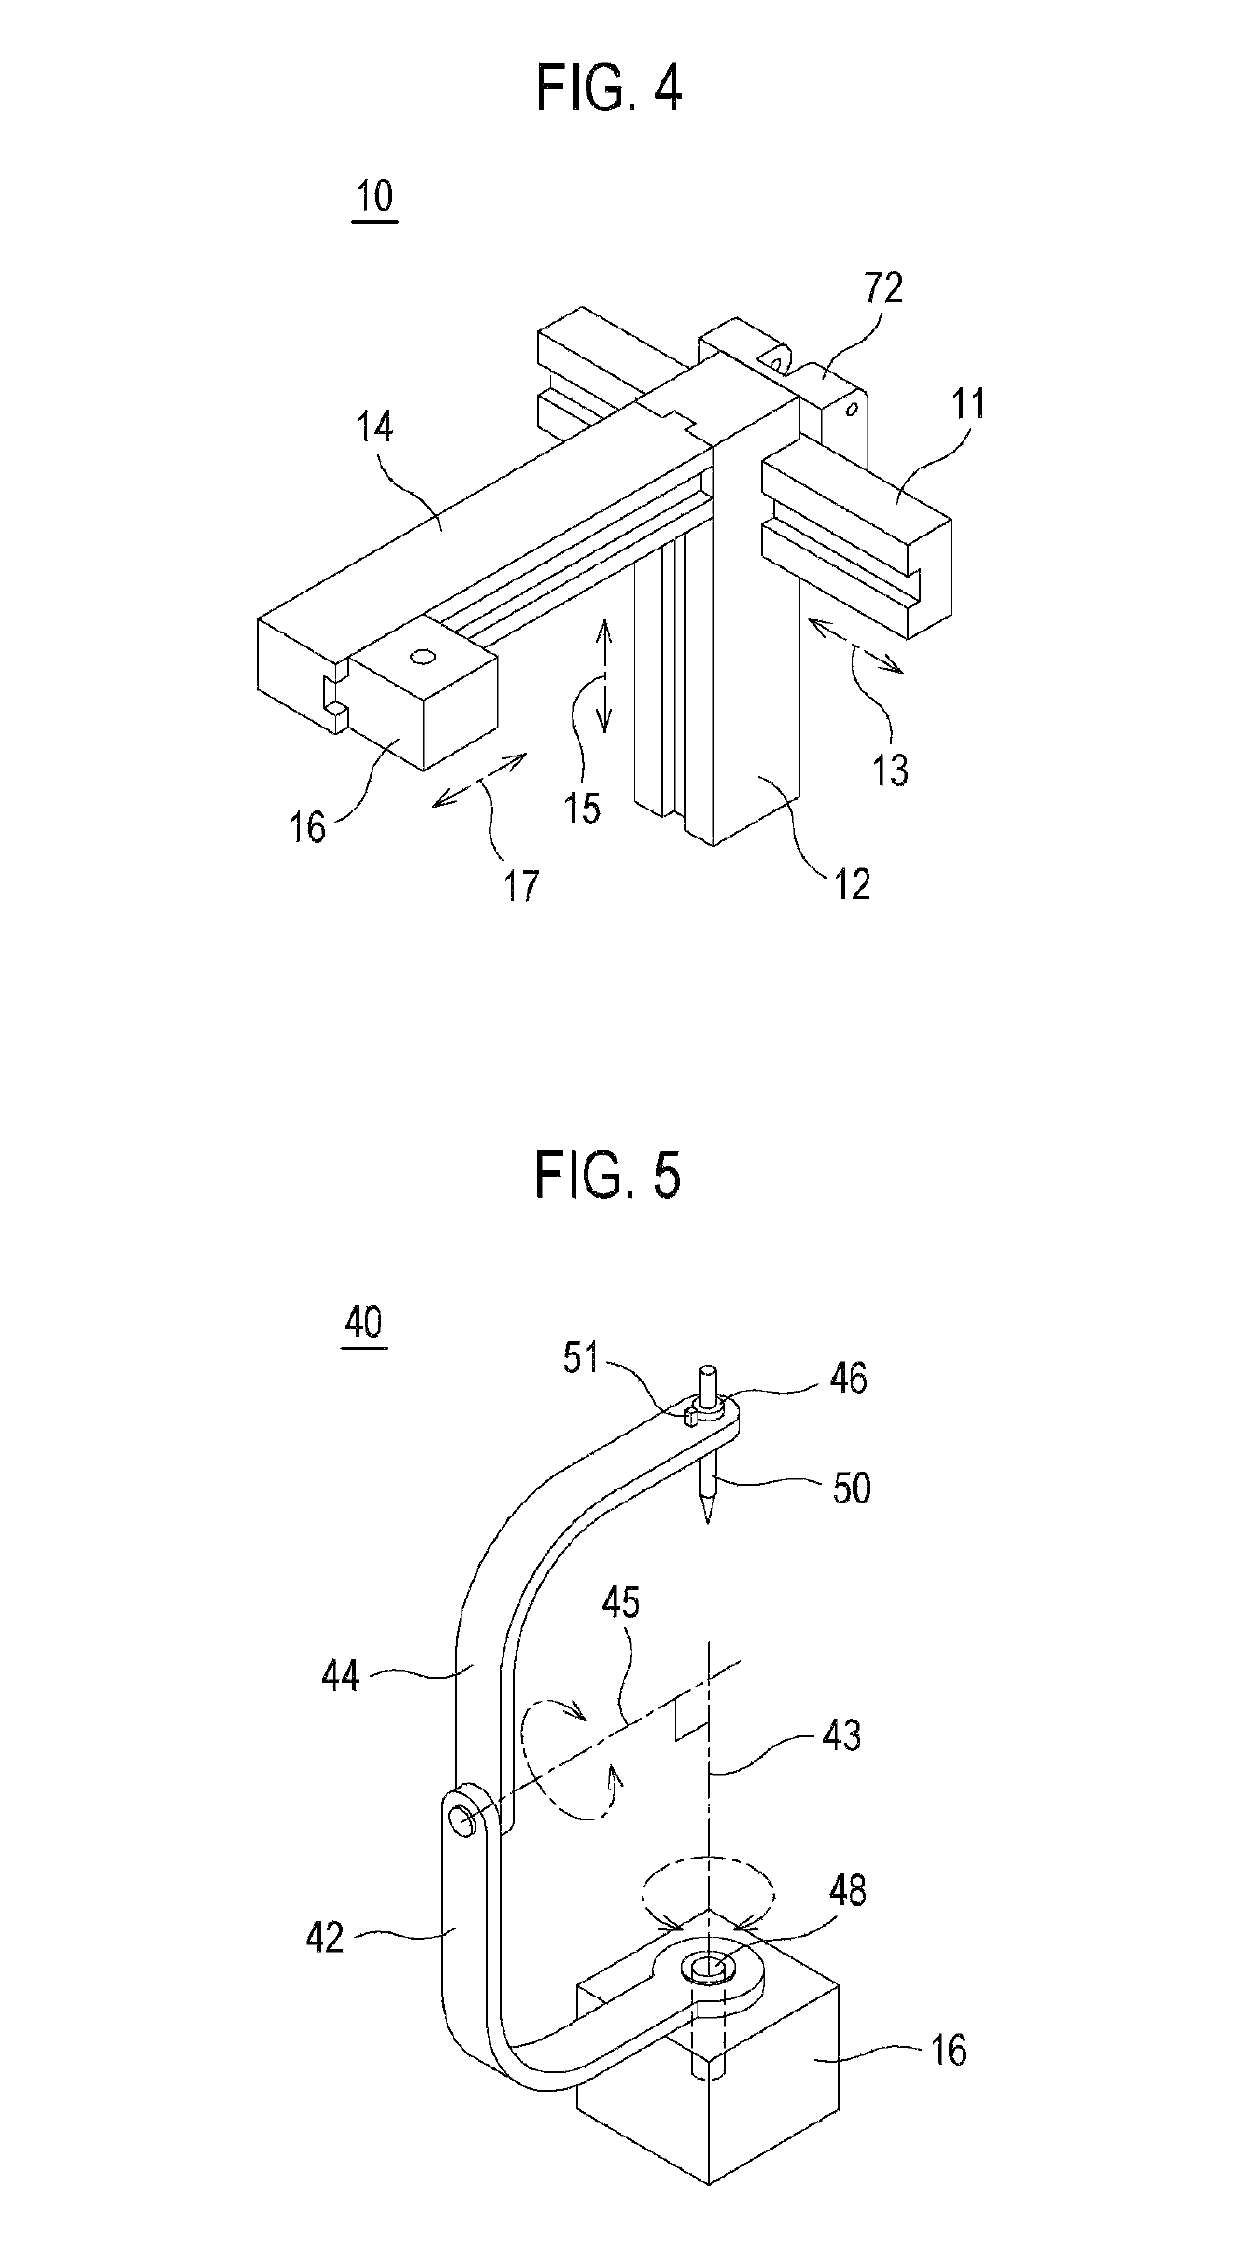 Surgical robot system for stereotactic surgery and method for controlling stereotactic surgery robot